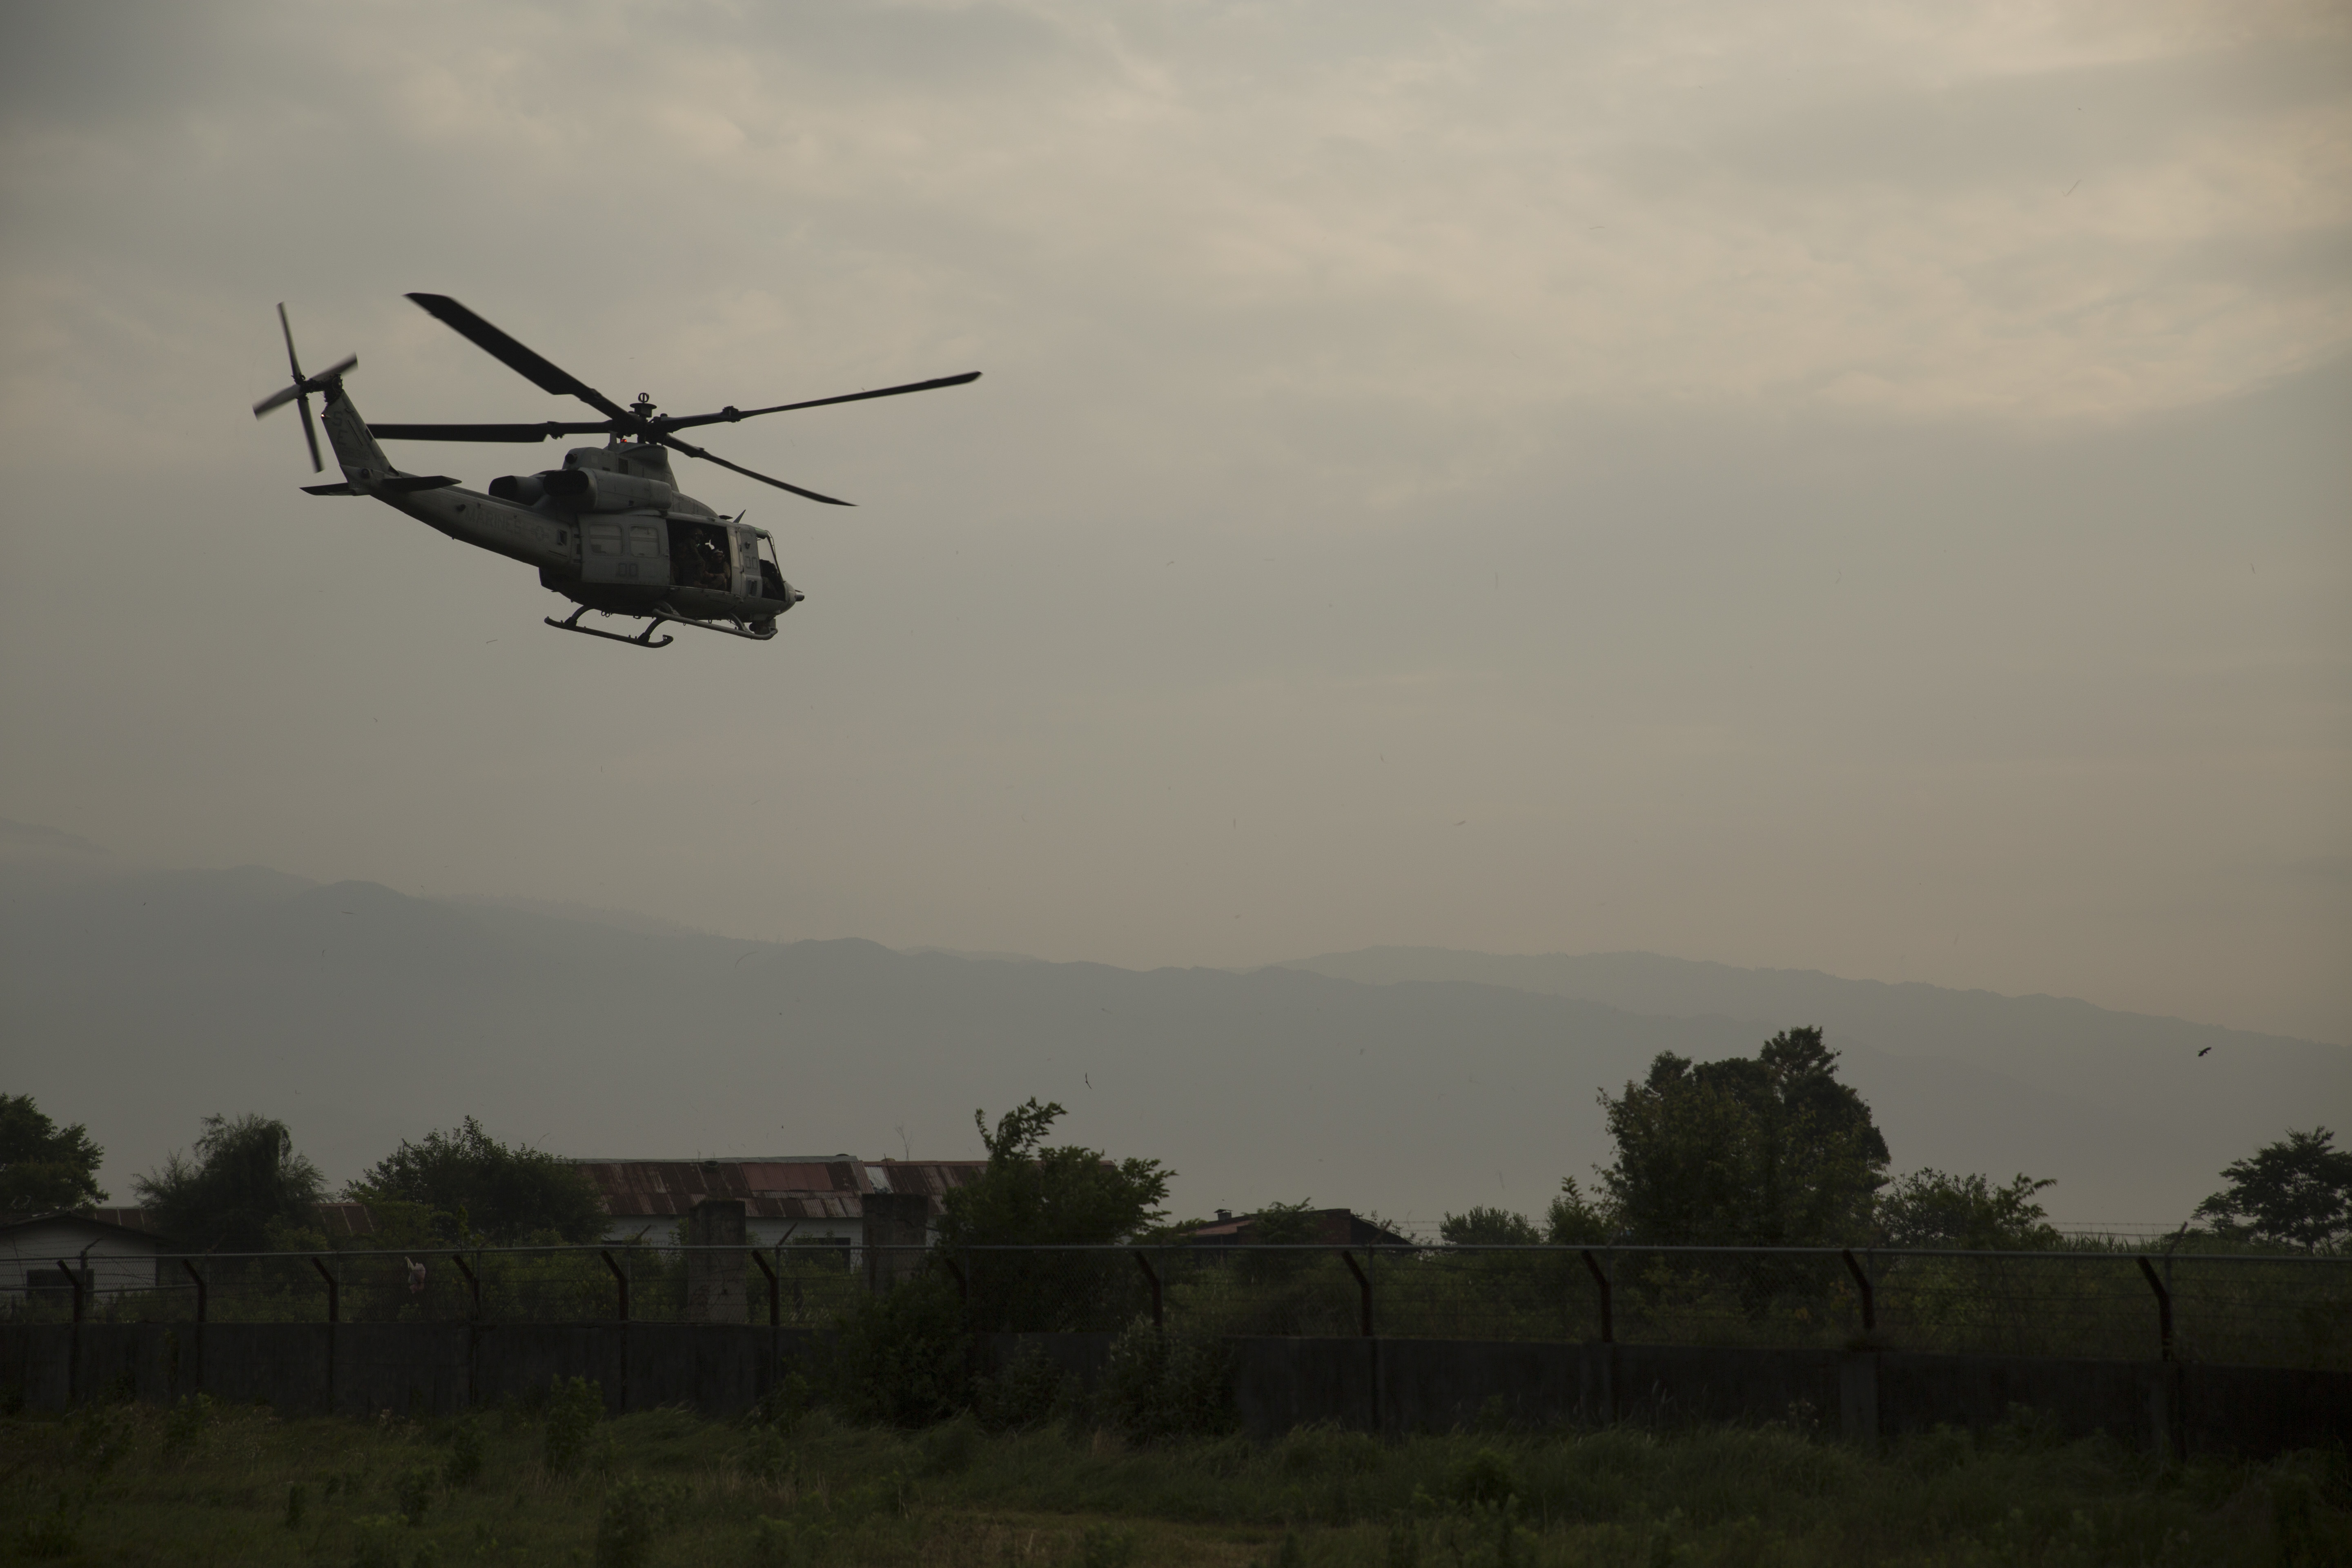 A UH-1Y Huey helicopter takes off for a search and rescue mission from the Tribhuvan International Airport in Kathmandu, Nepal, May 13, to find the missing UH-1Y Huey assigned to Marine Light Attack Helicopter Squadron 469, carrying six Marines and two Nepalese soldiers. US Marine Corps photo.